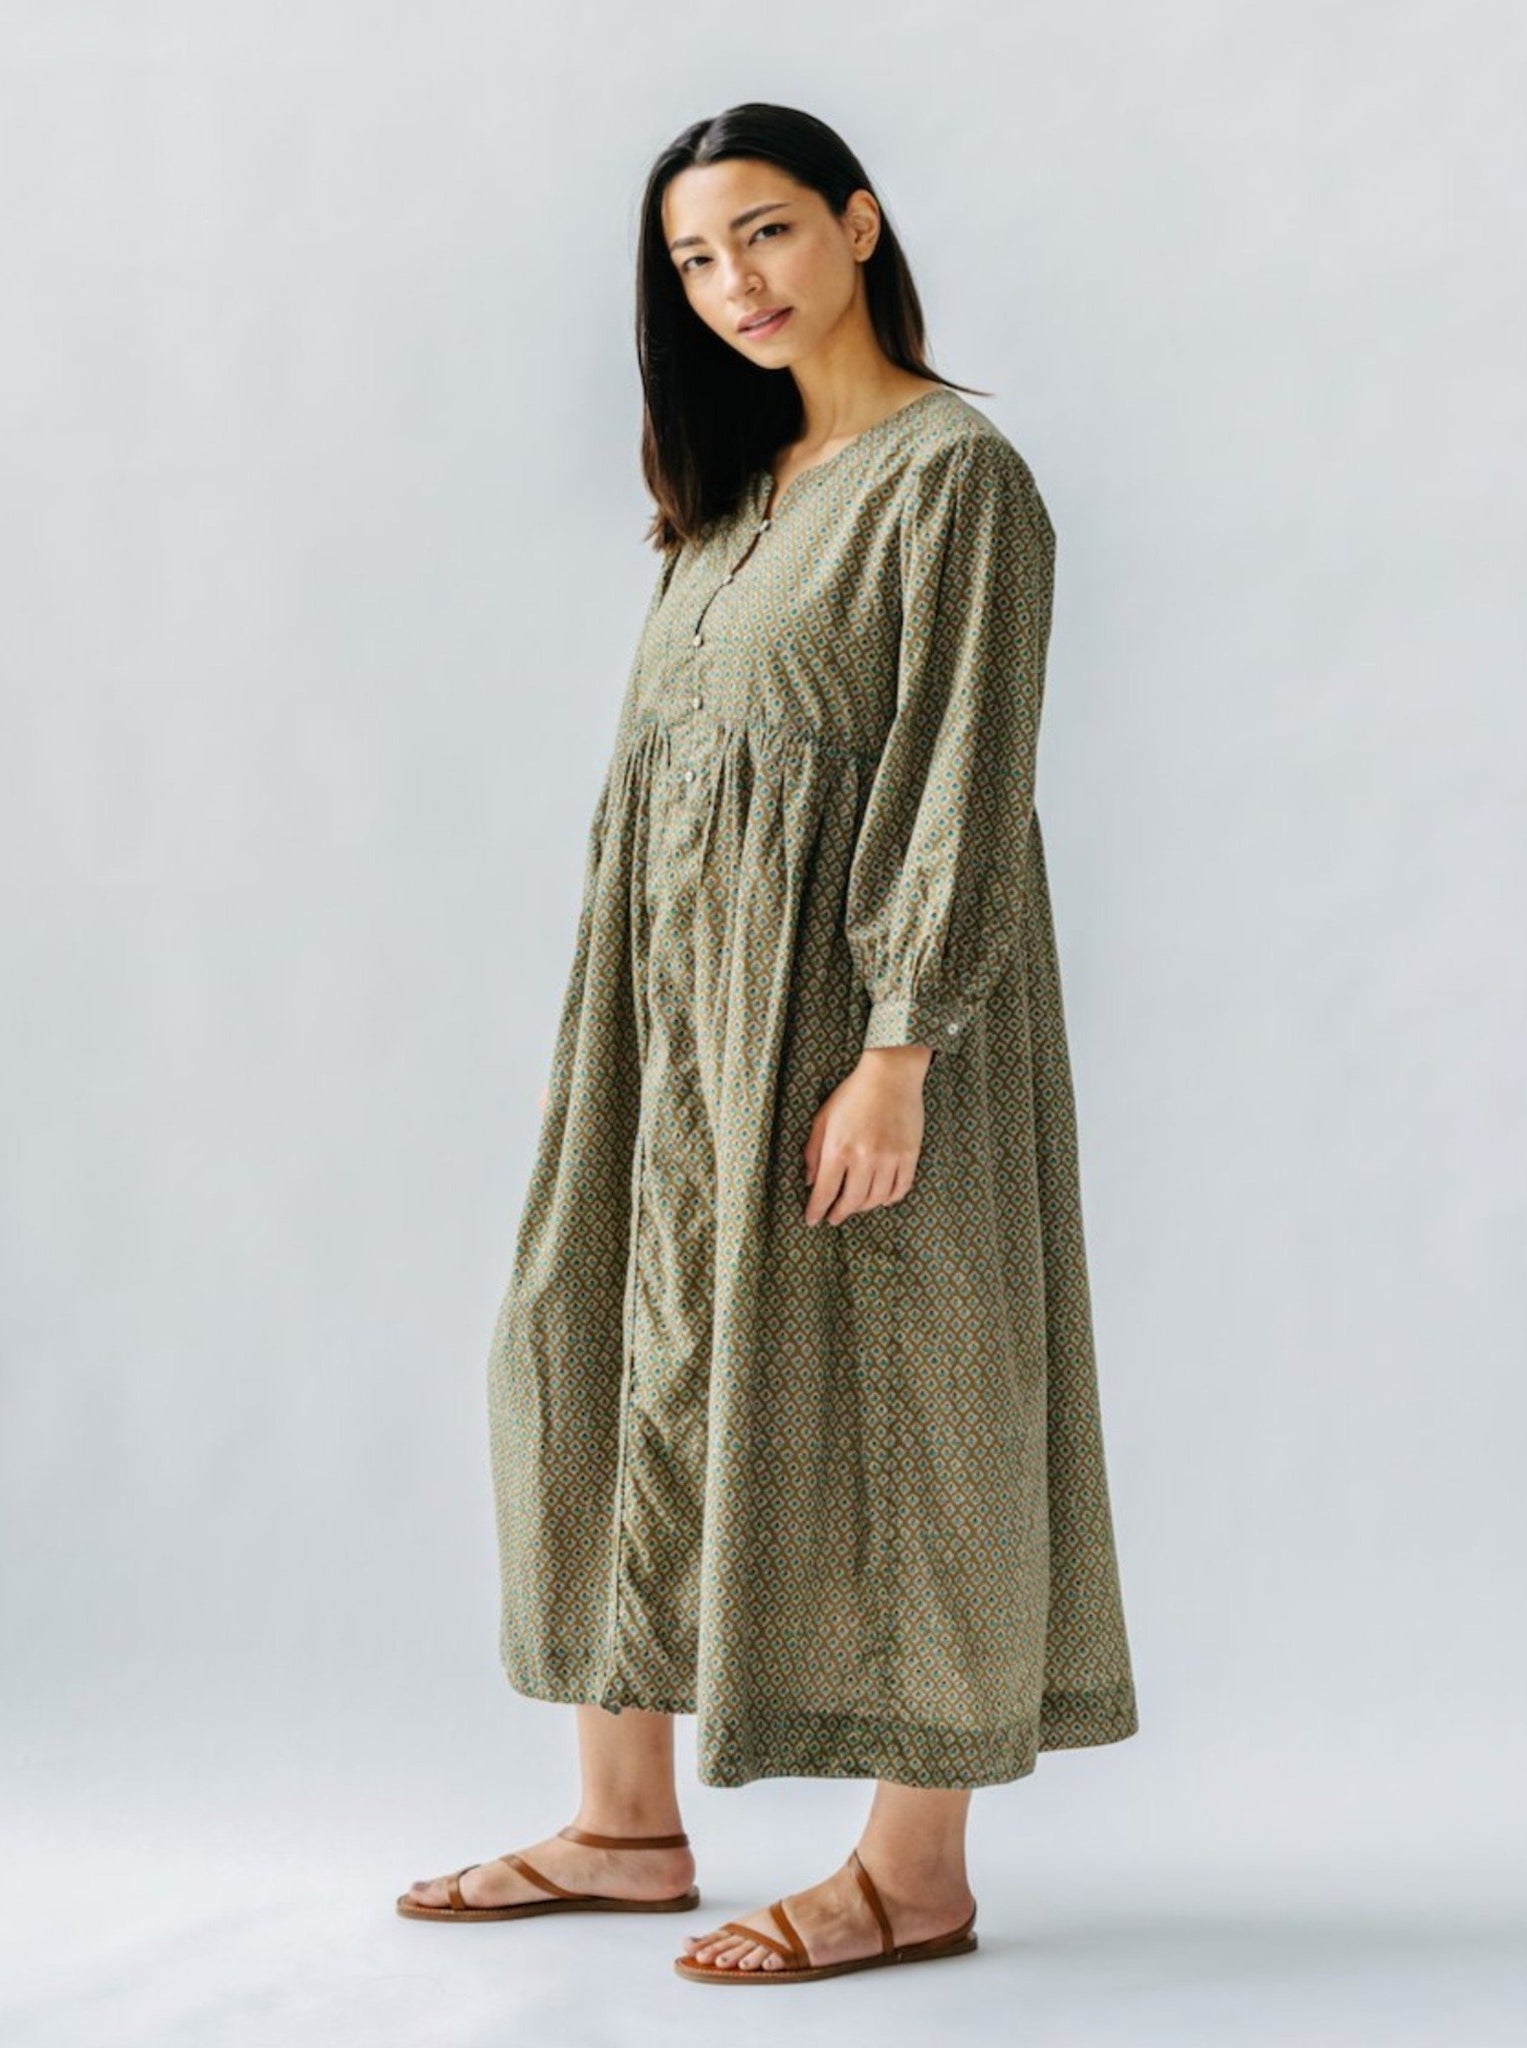 Casual women's dress perfect for transitioning from summer to fall.